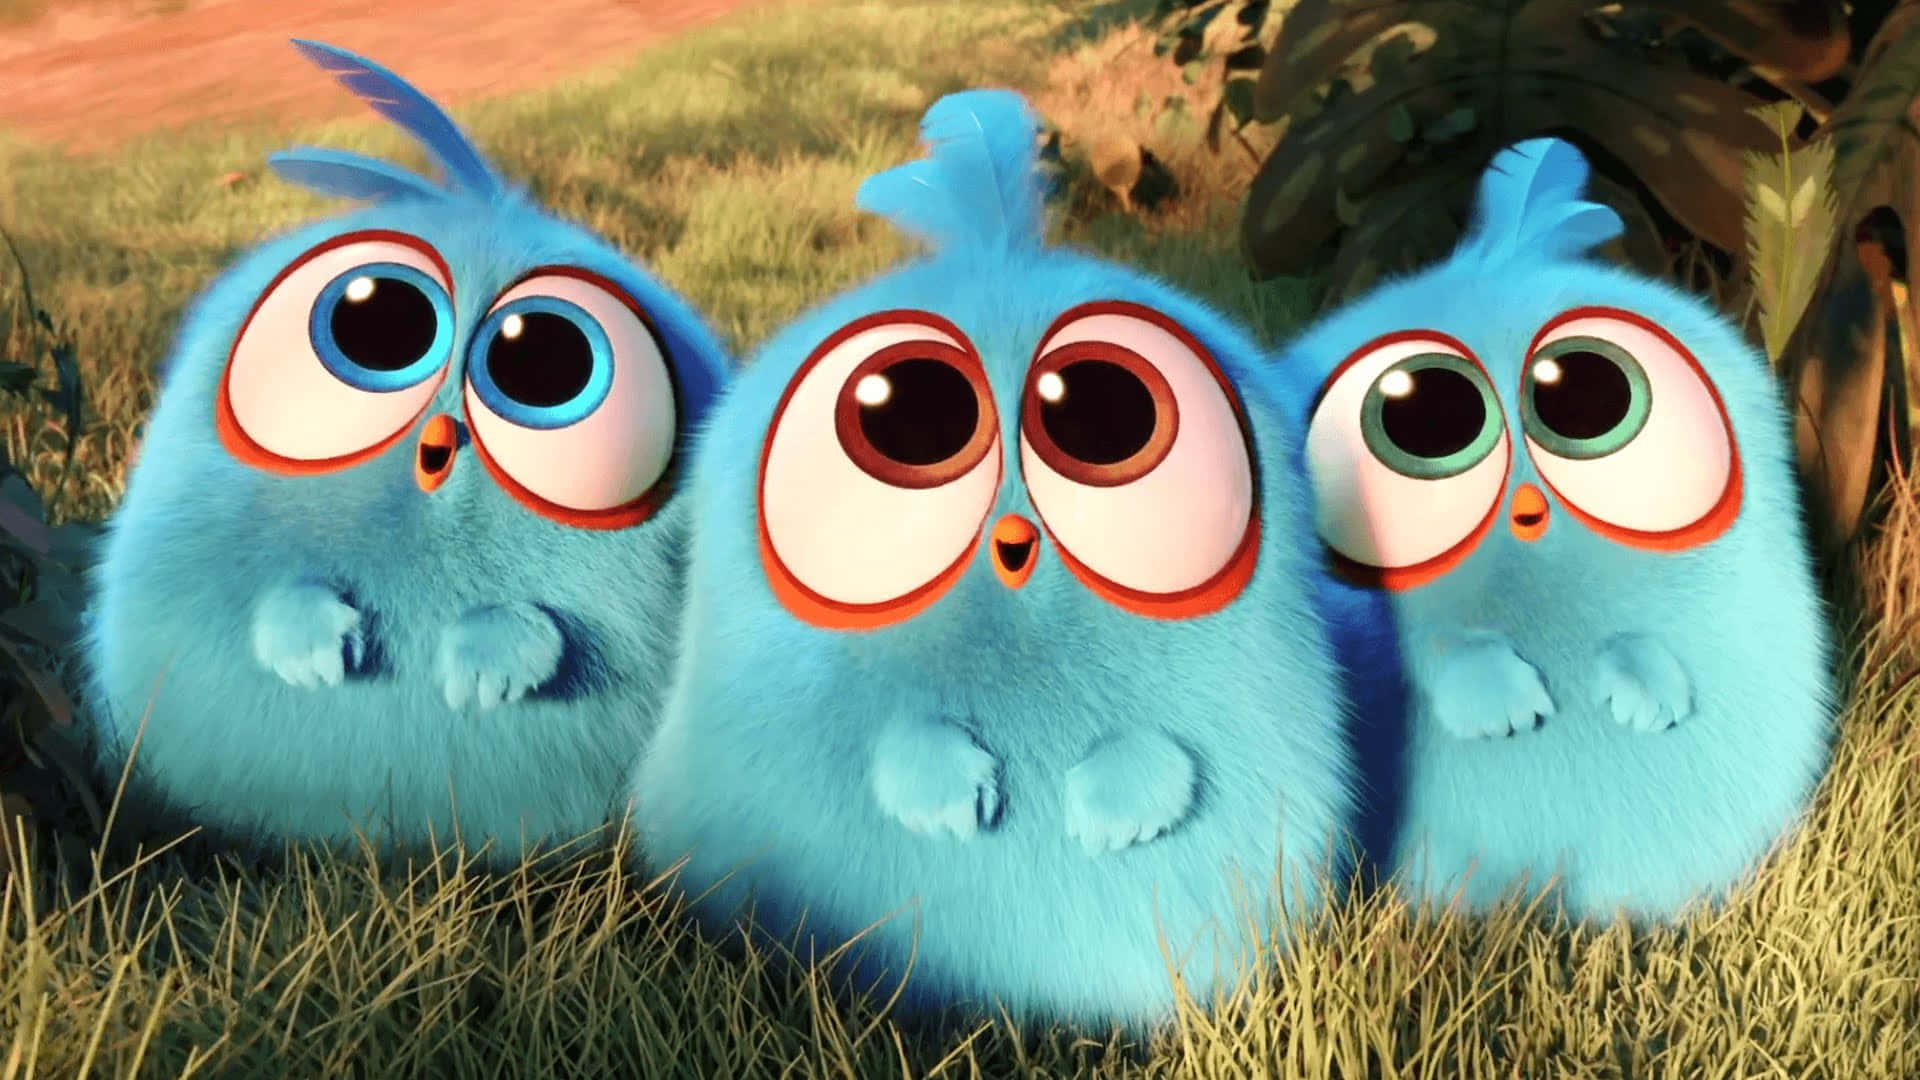 angry birds - a blue bird with big eyes